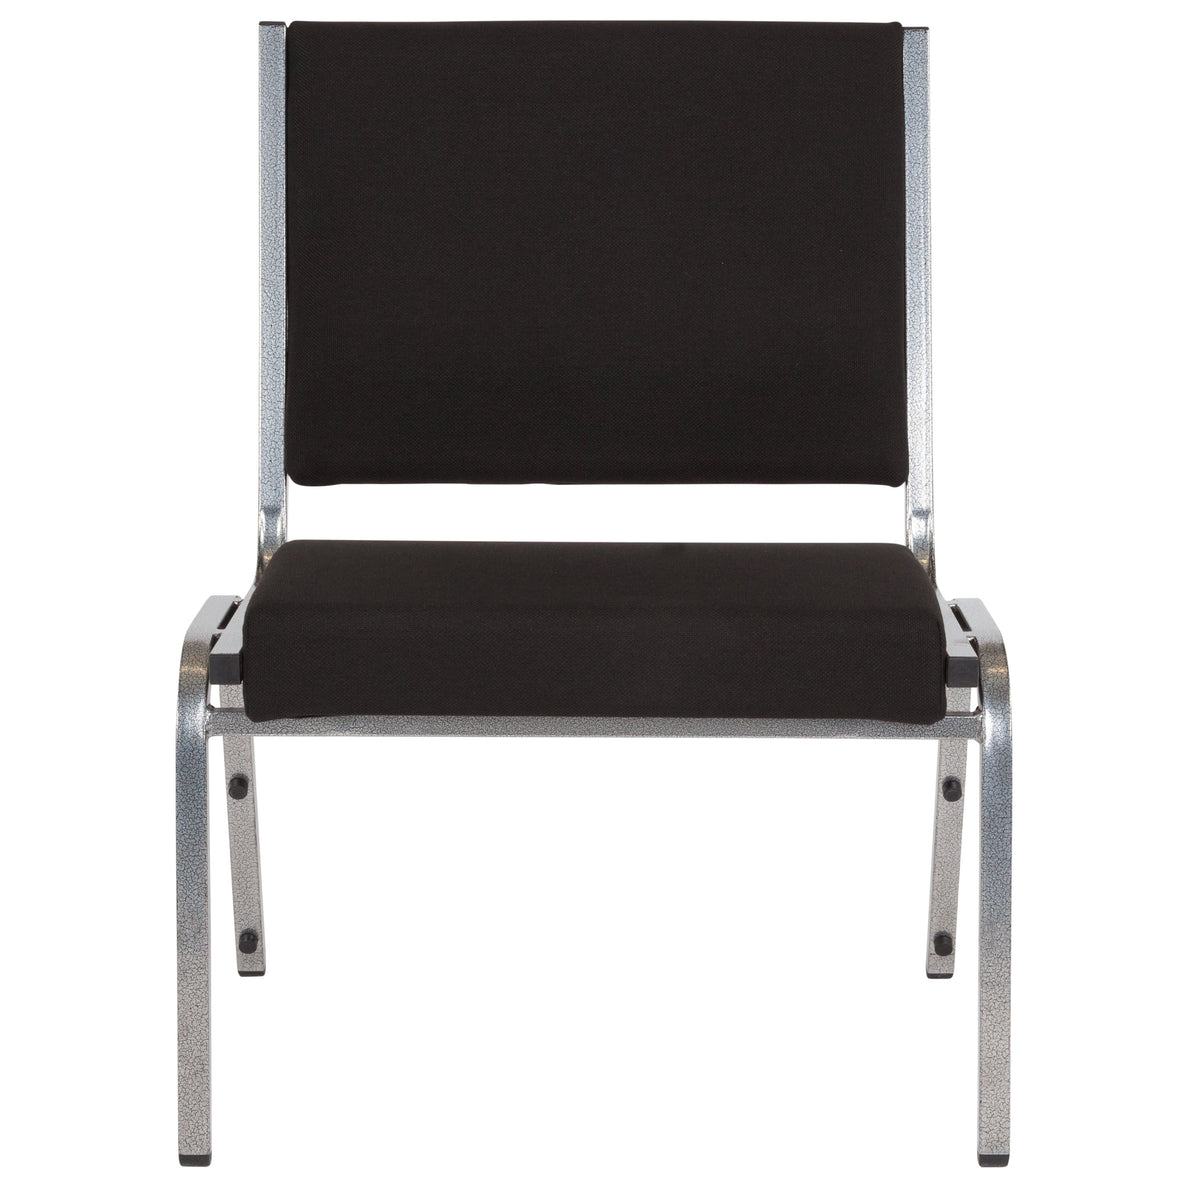 Black Fabric |#| 1000 lb. Rated Black Fabric Bariatric Medical Reception Chair